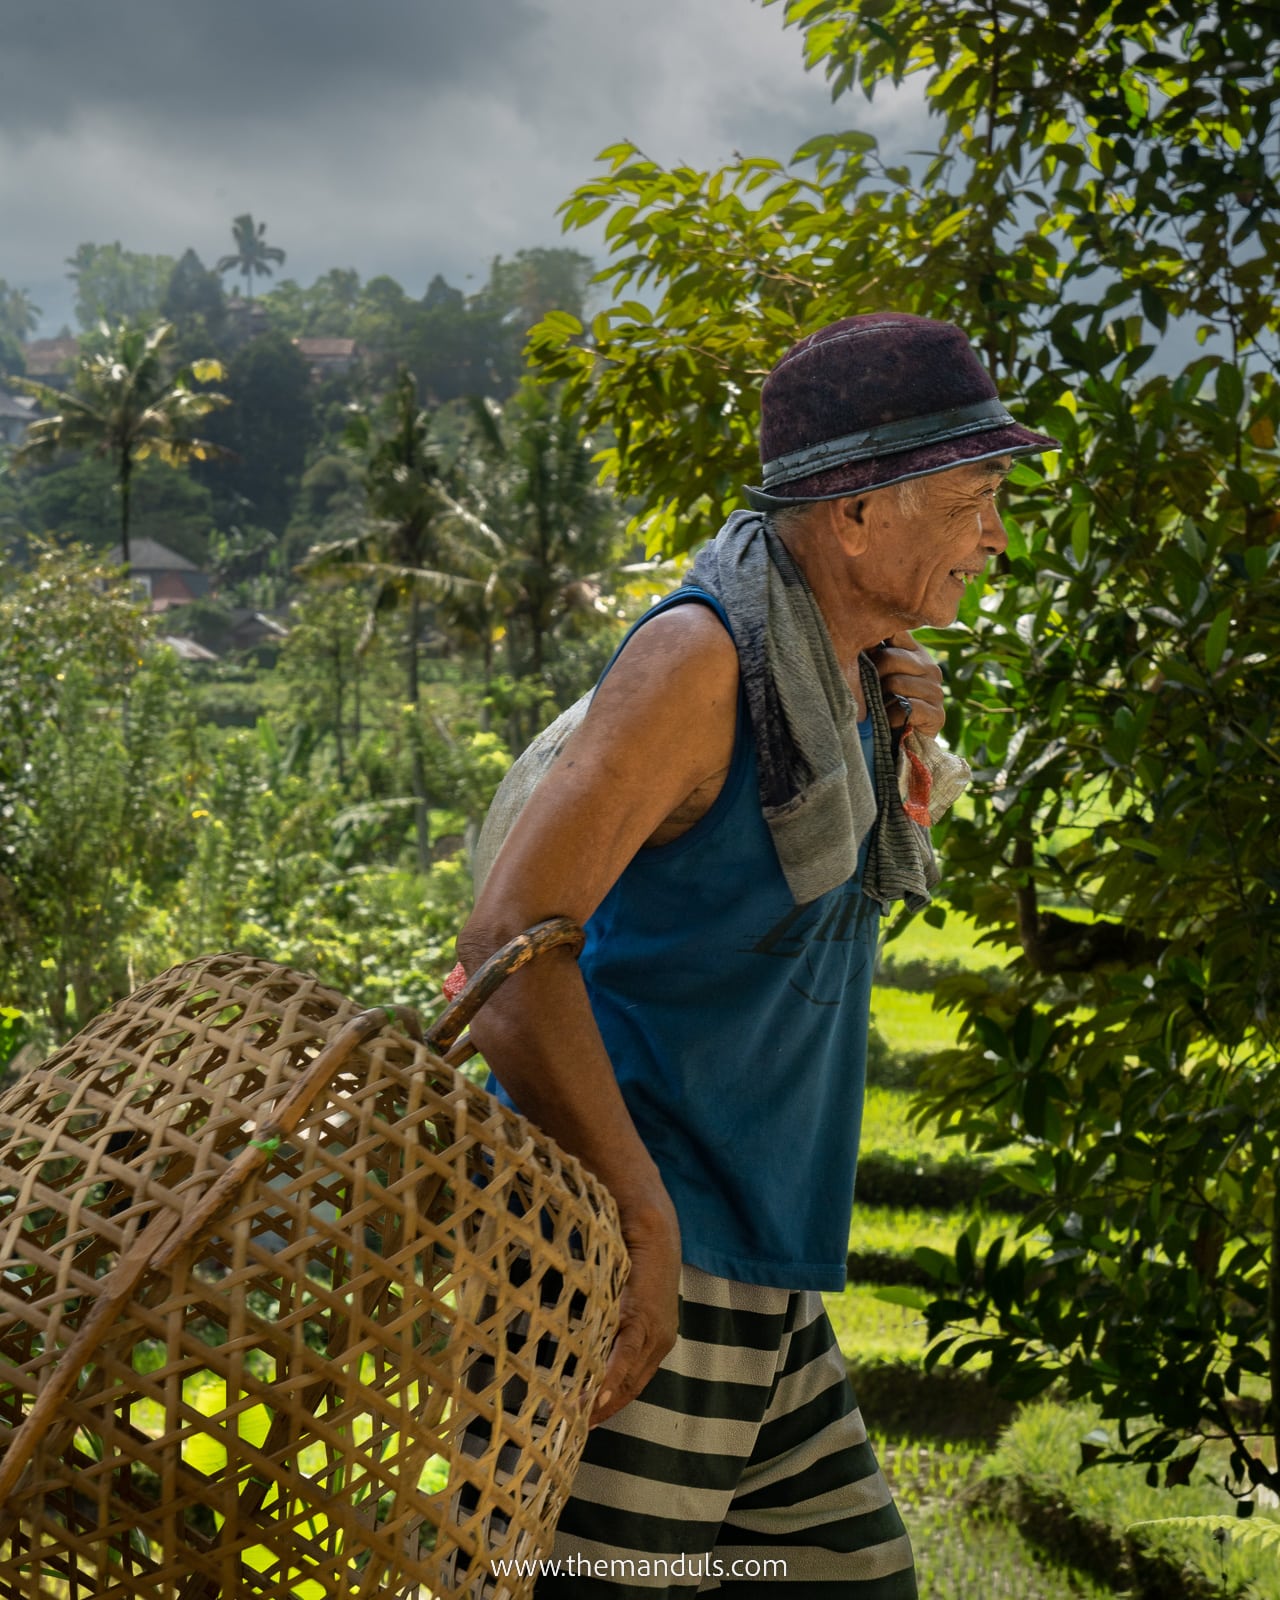 Bali local farmers working best places to visit in Bali things to do in ubud tibumana waterfall ubud